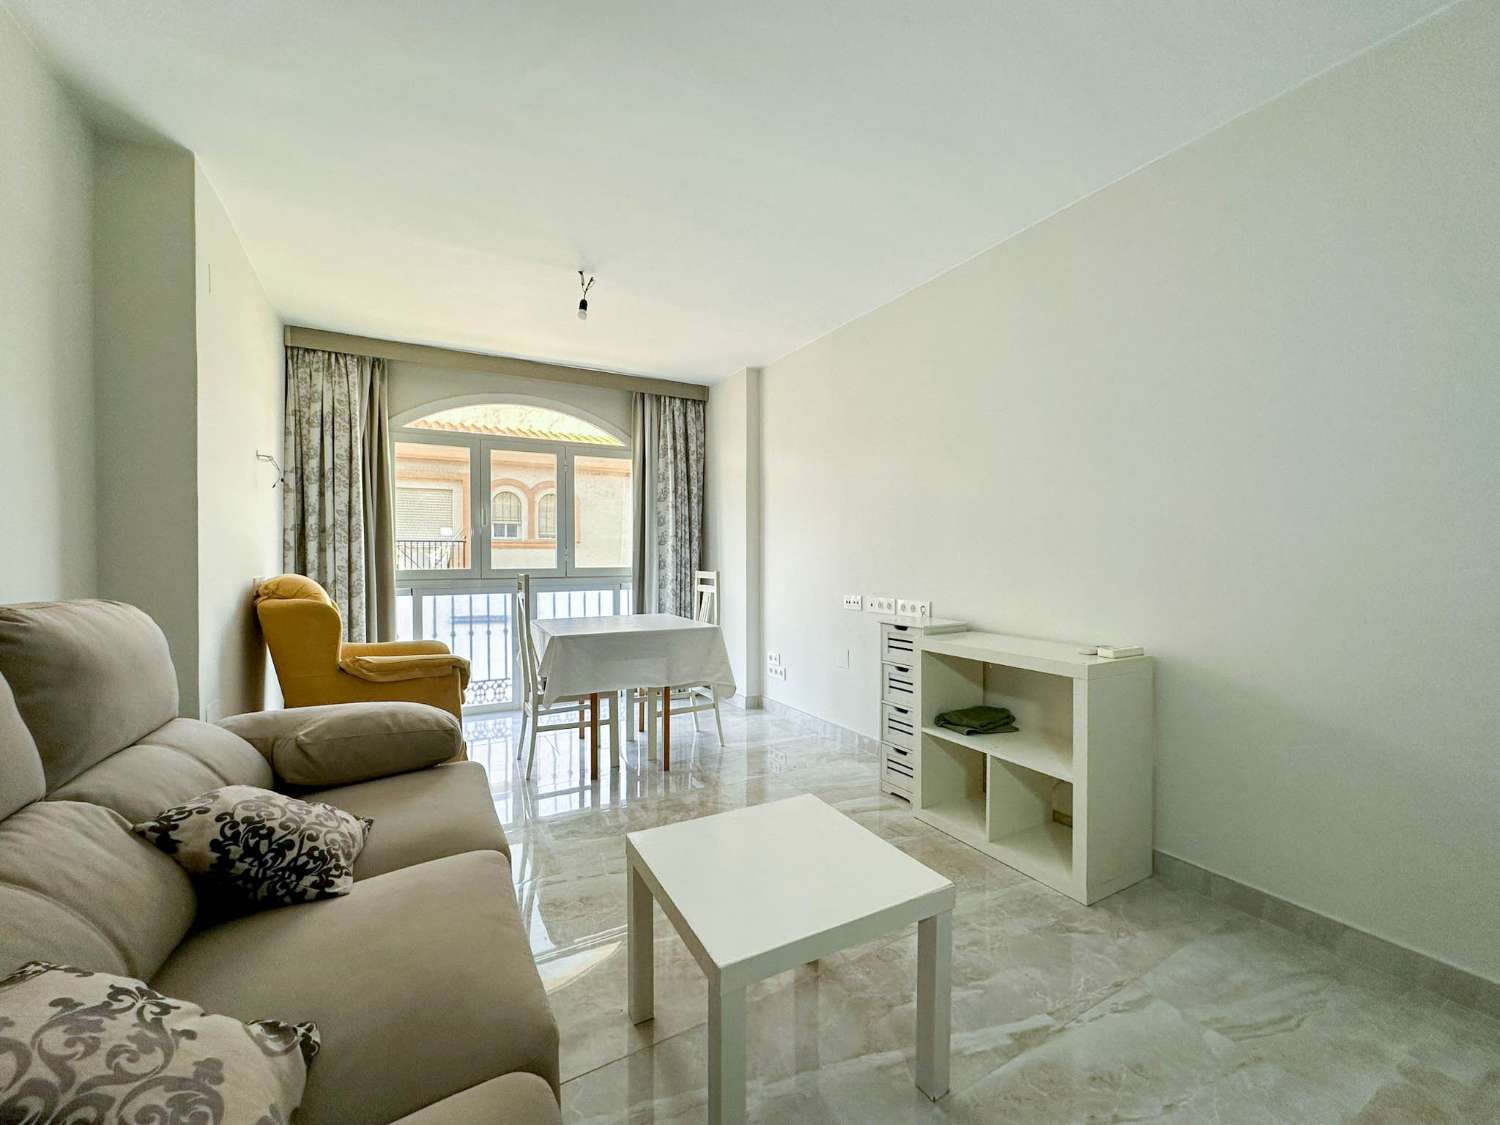 Beautiful renovated apartment for sale in the center of Salobrena